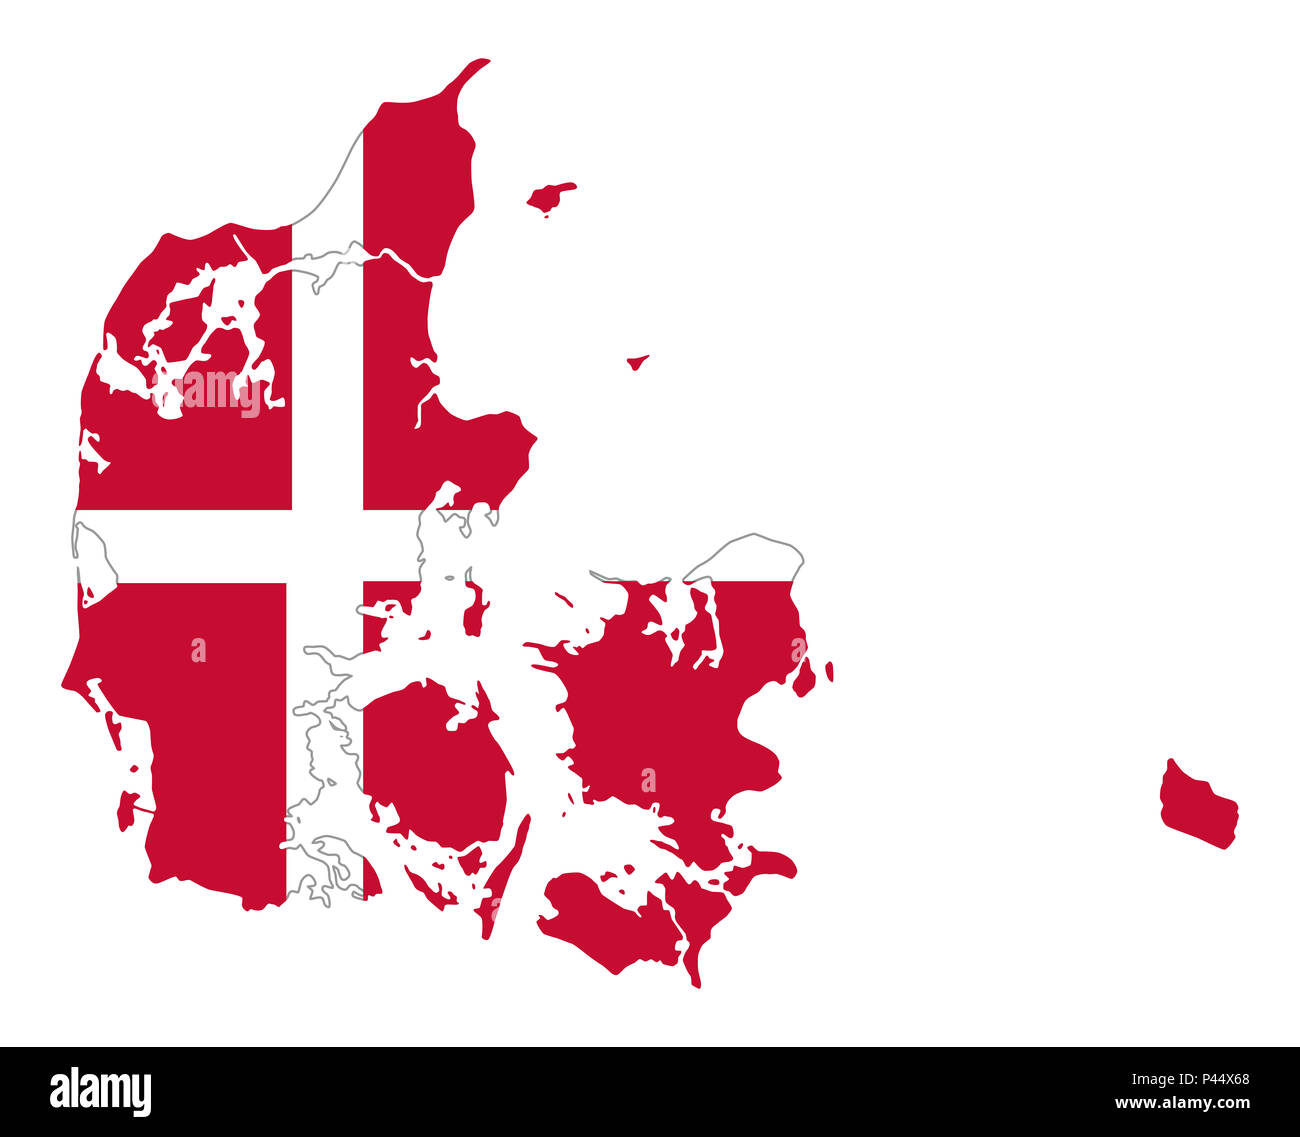 Flag of Denmark in country silhouette. Danish national state ensign, a white Scandinavian Cross on a red field. Kingdom and Nordic country in Europe. Stock Photo